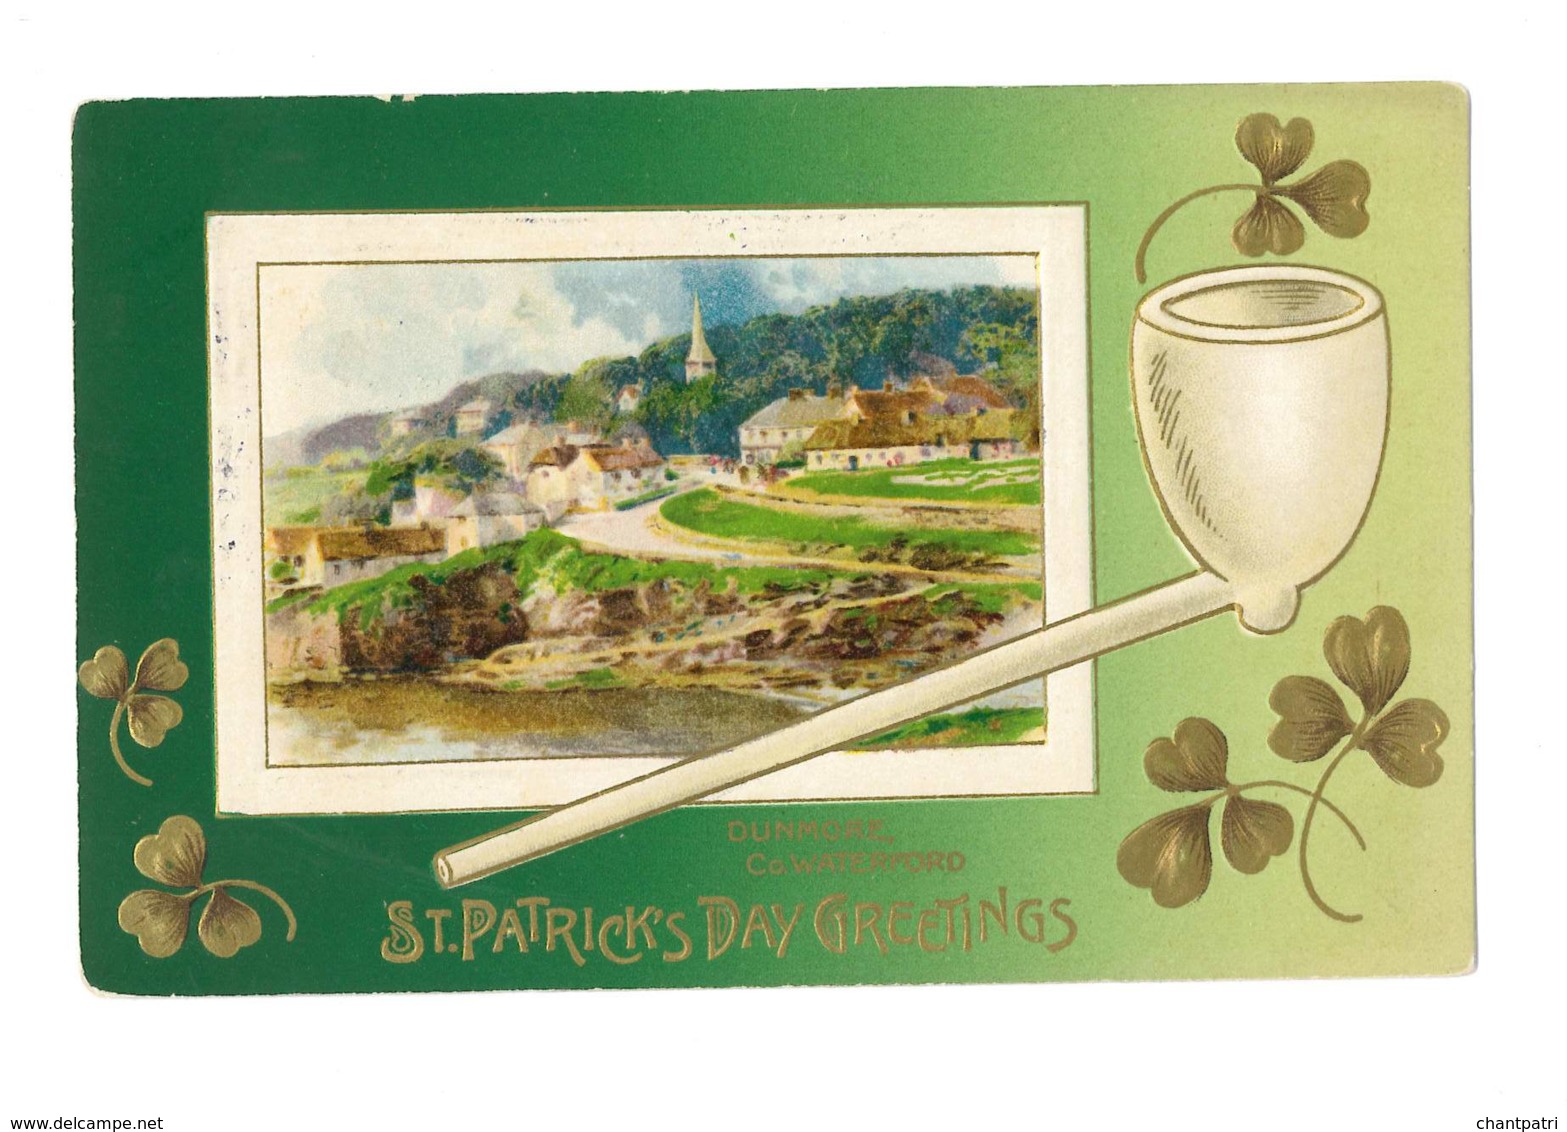 St Patrick's Day Greetings - Dunmore Co Waterford - Pipe Et Trèfles - Gaufrée - Scan Recto/Verso - 6002 - Saint-Patrick